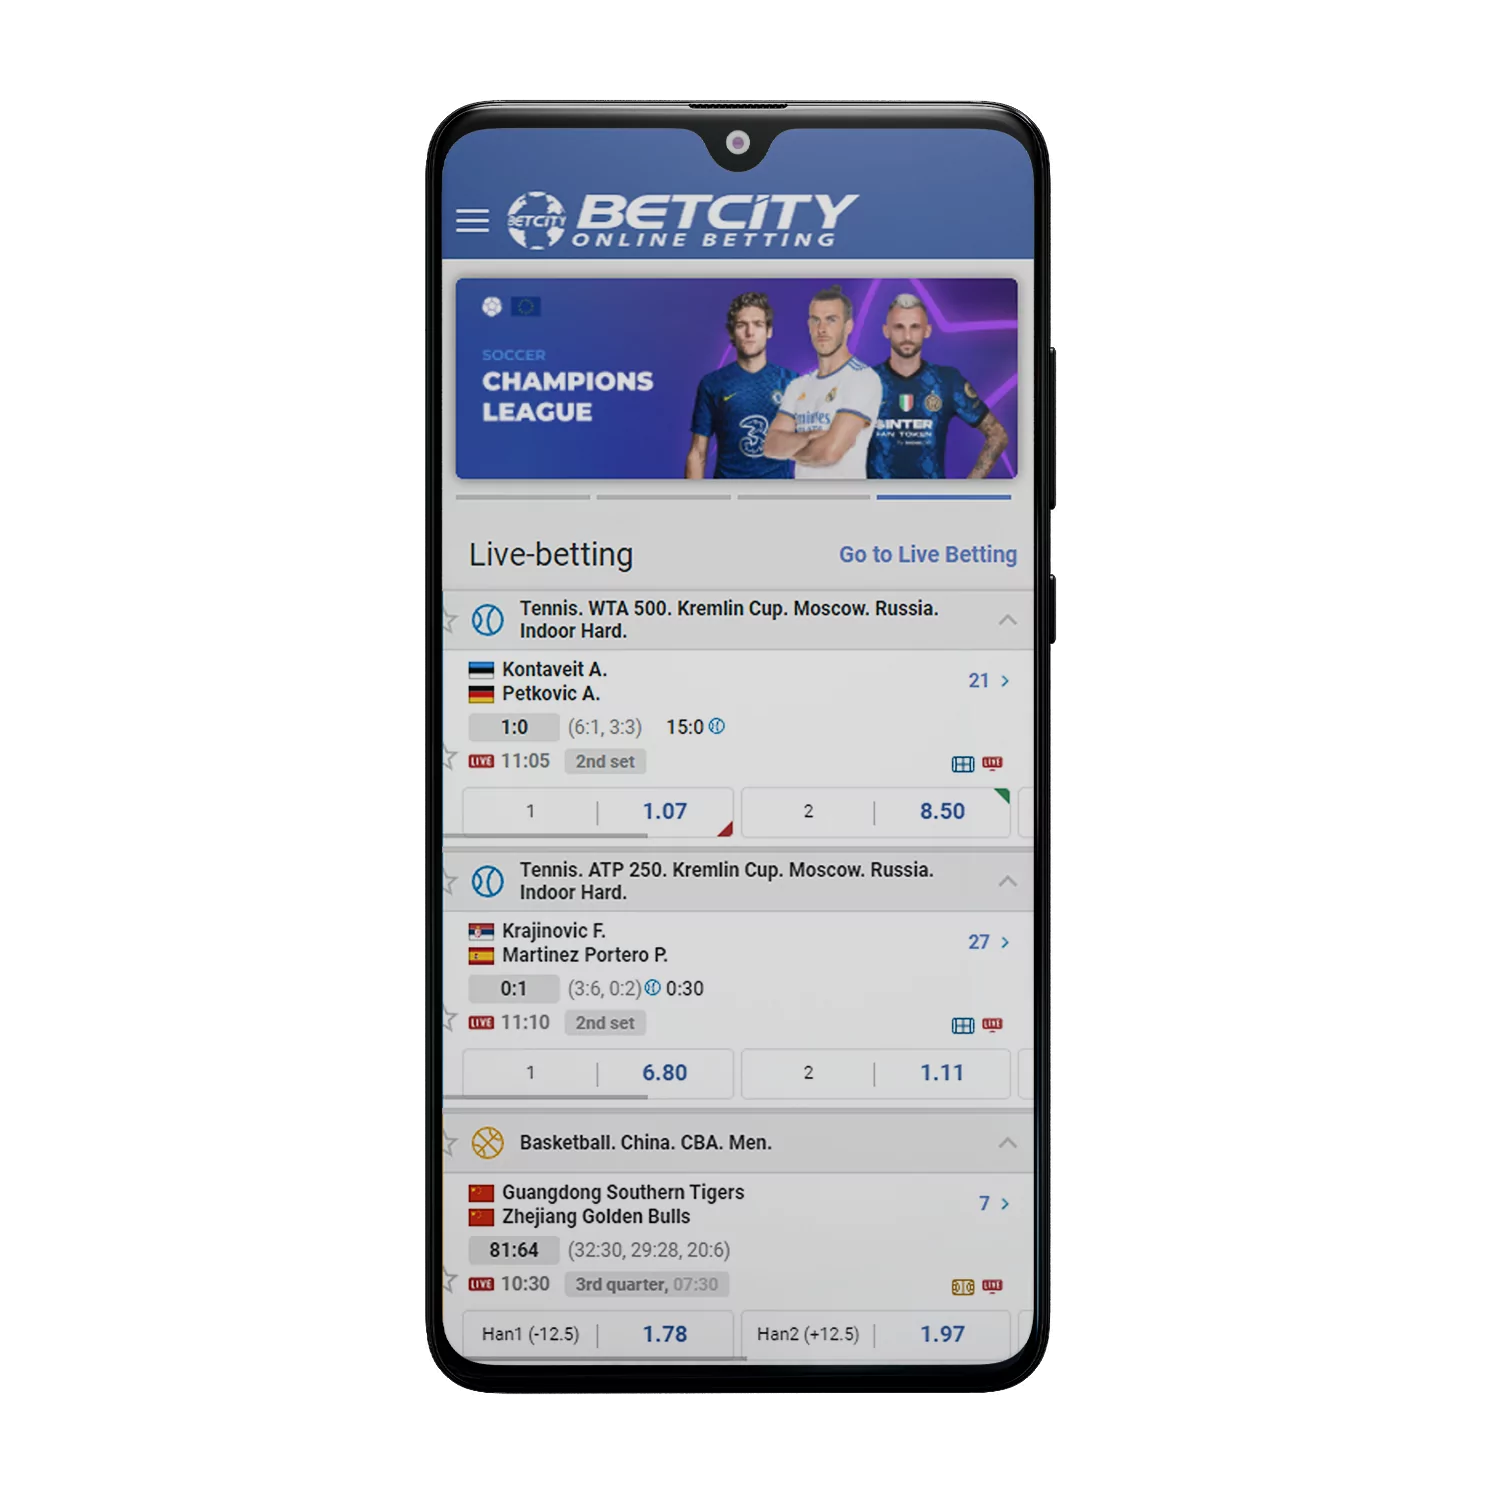 The Betcity app is available for Android and iOS.